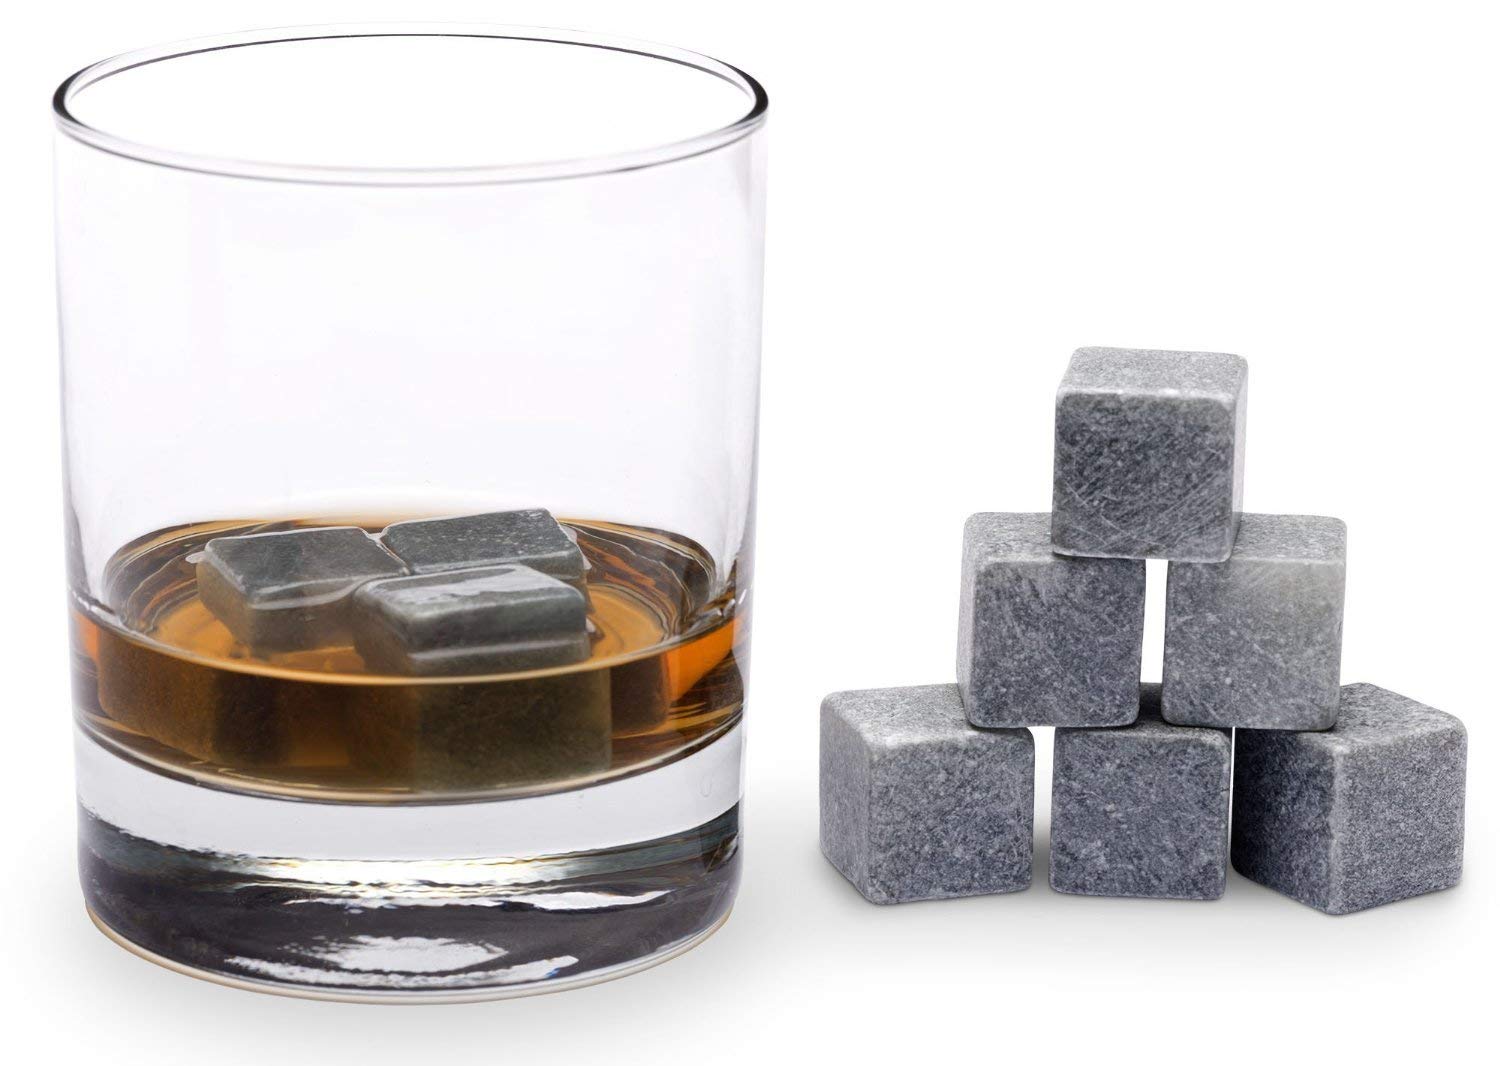 Stop diluting your whiskey and get yourself some <a href="https://amzn.to/2MCx96g" target="_blank">Whiskey Stones</a>, also they make you look fancy as hell.   